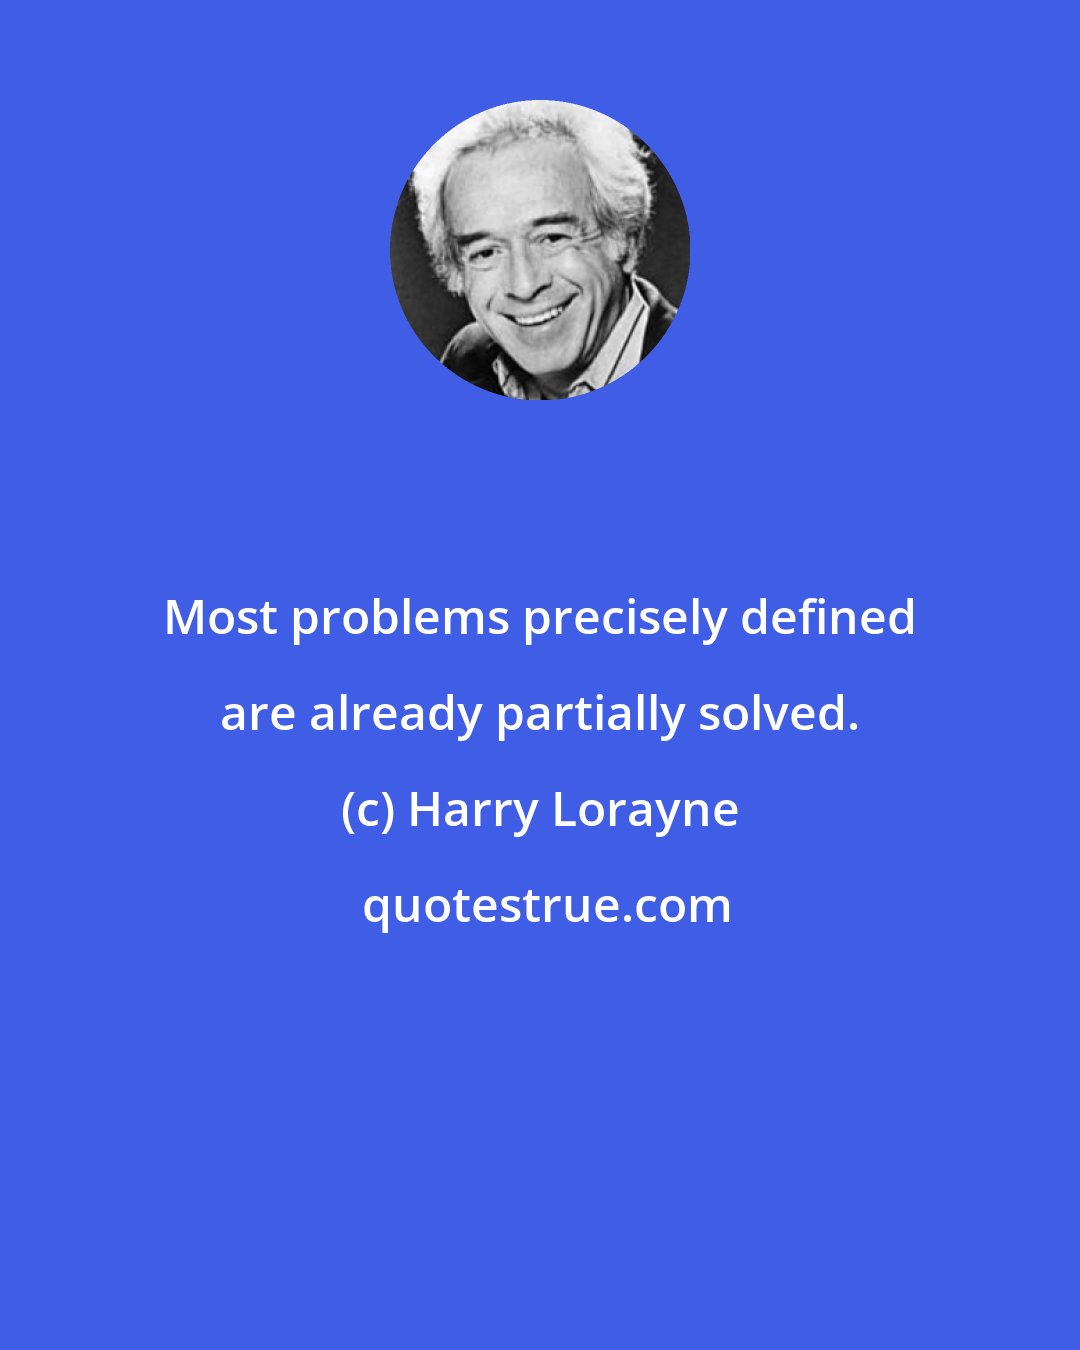 Harry Lorayne: Most problems precisely defined are already partially solved.